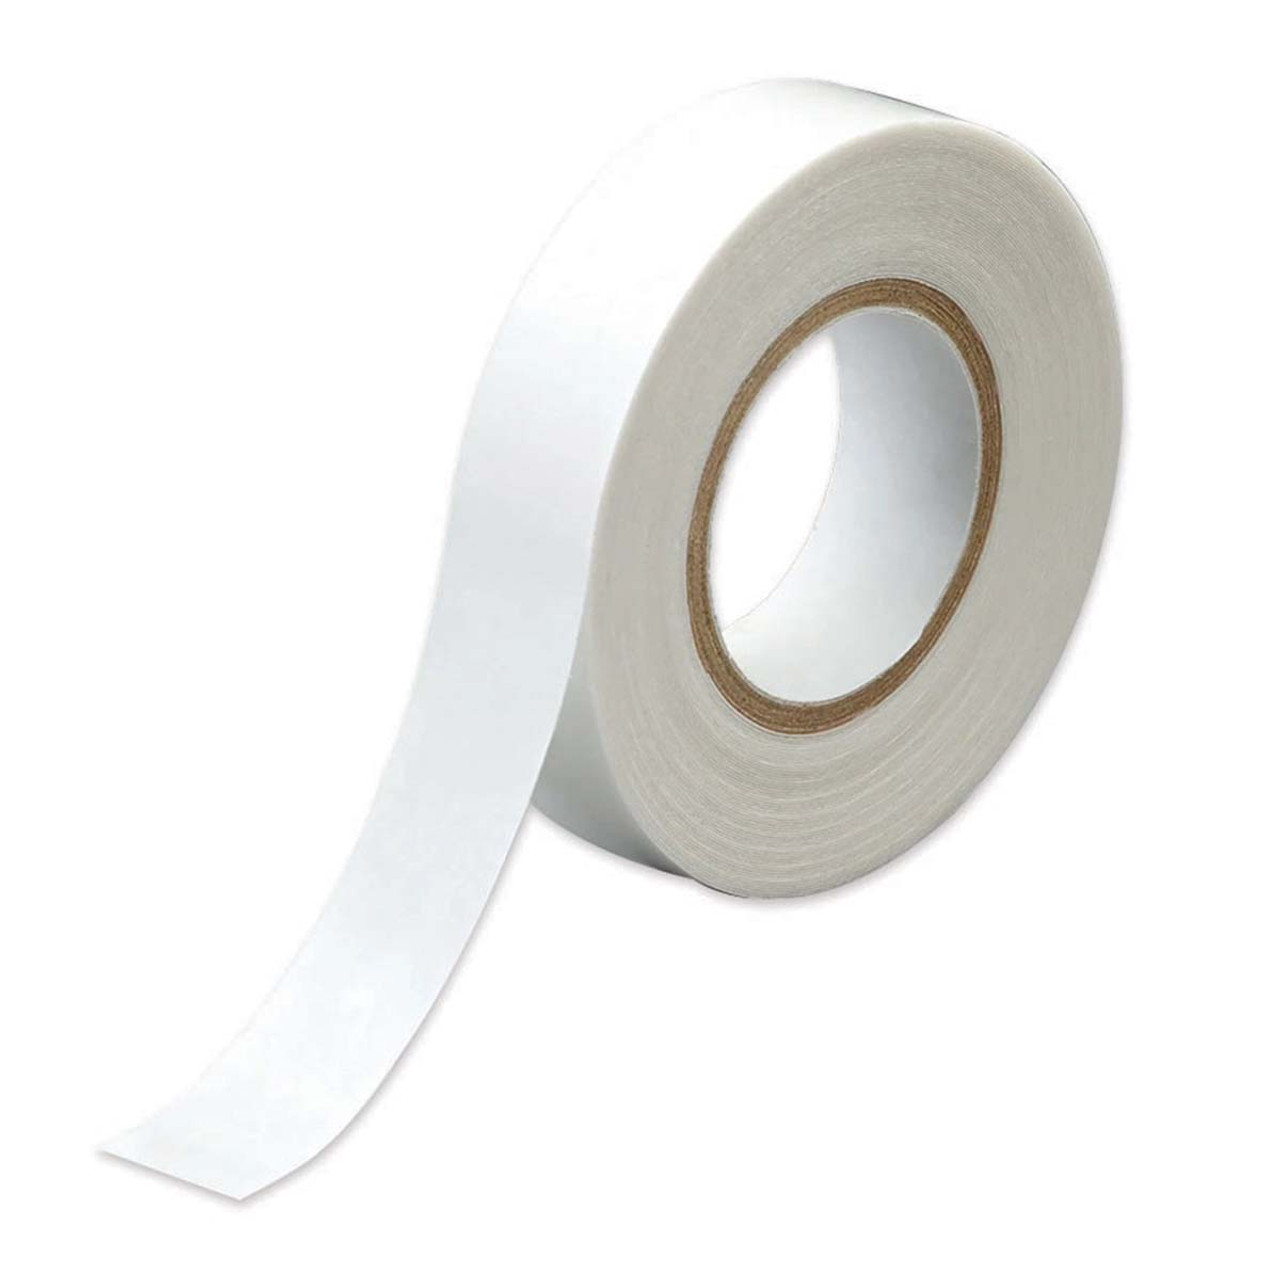 Clover Double Sided Basting Tape